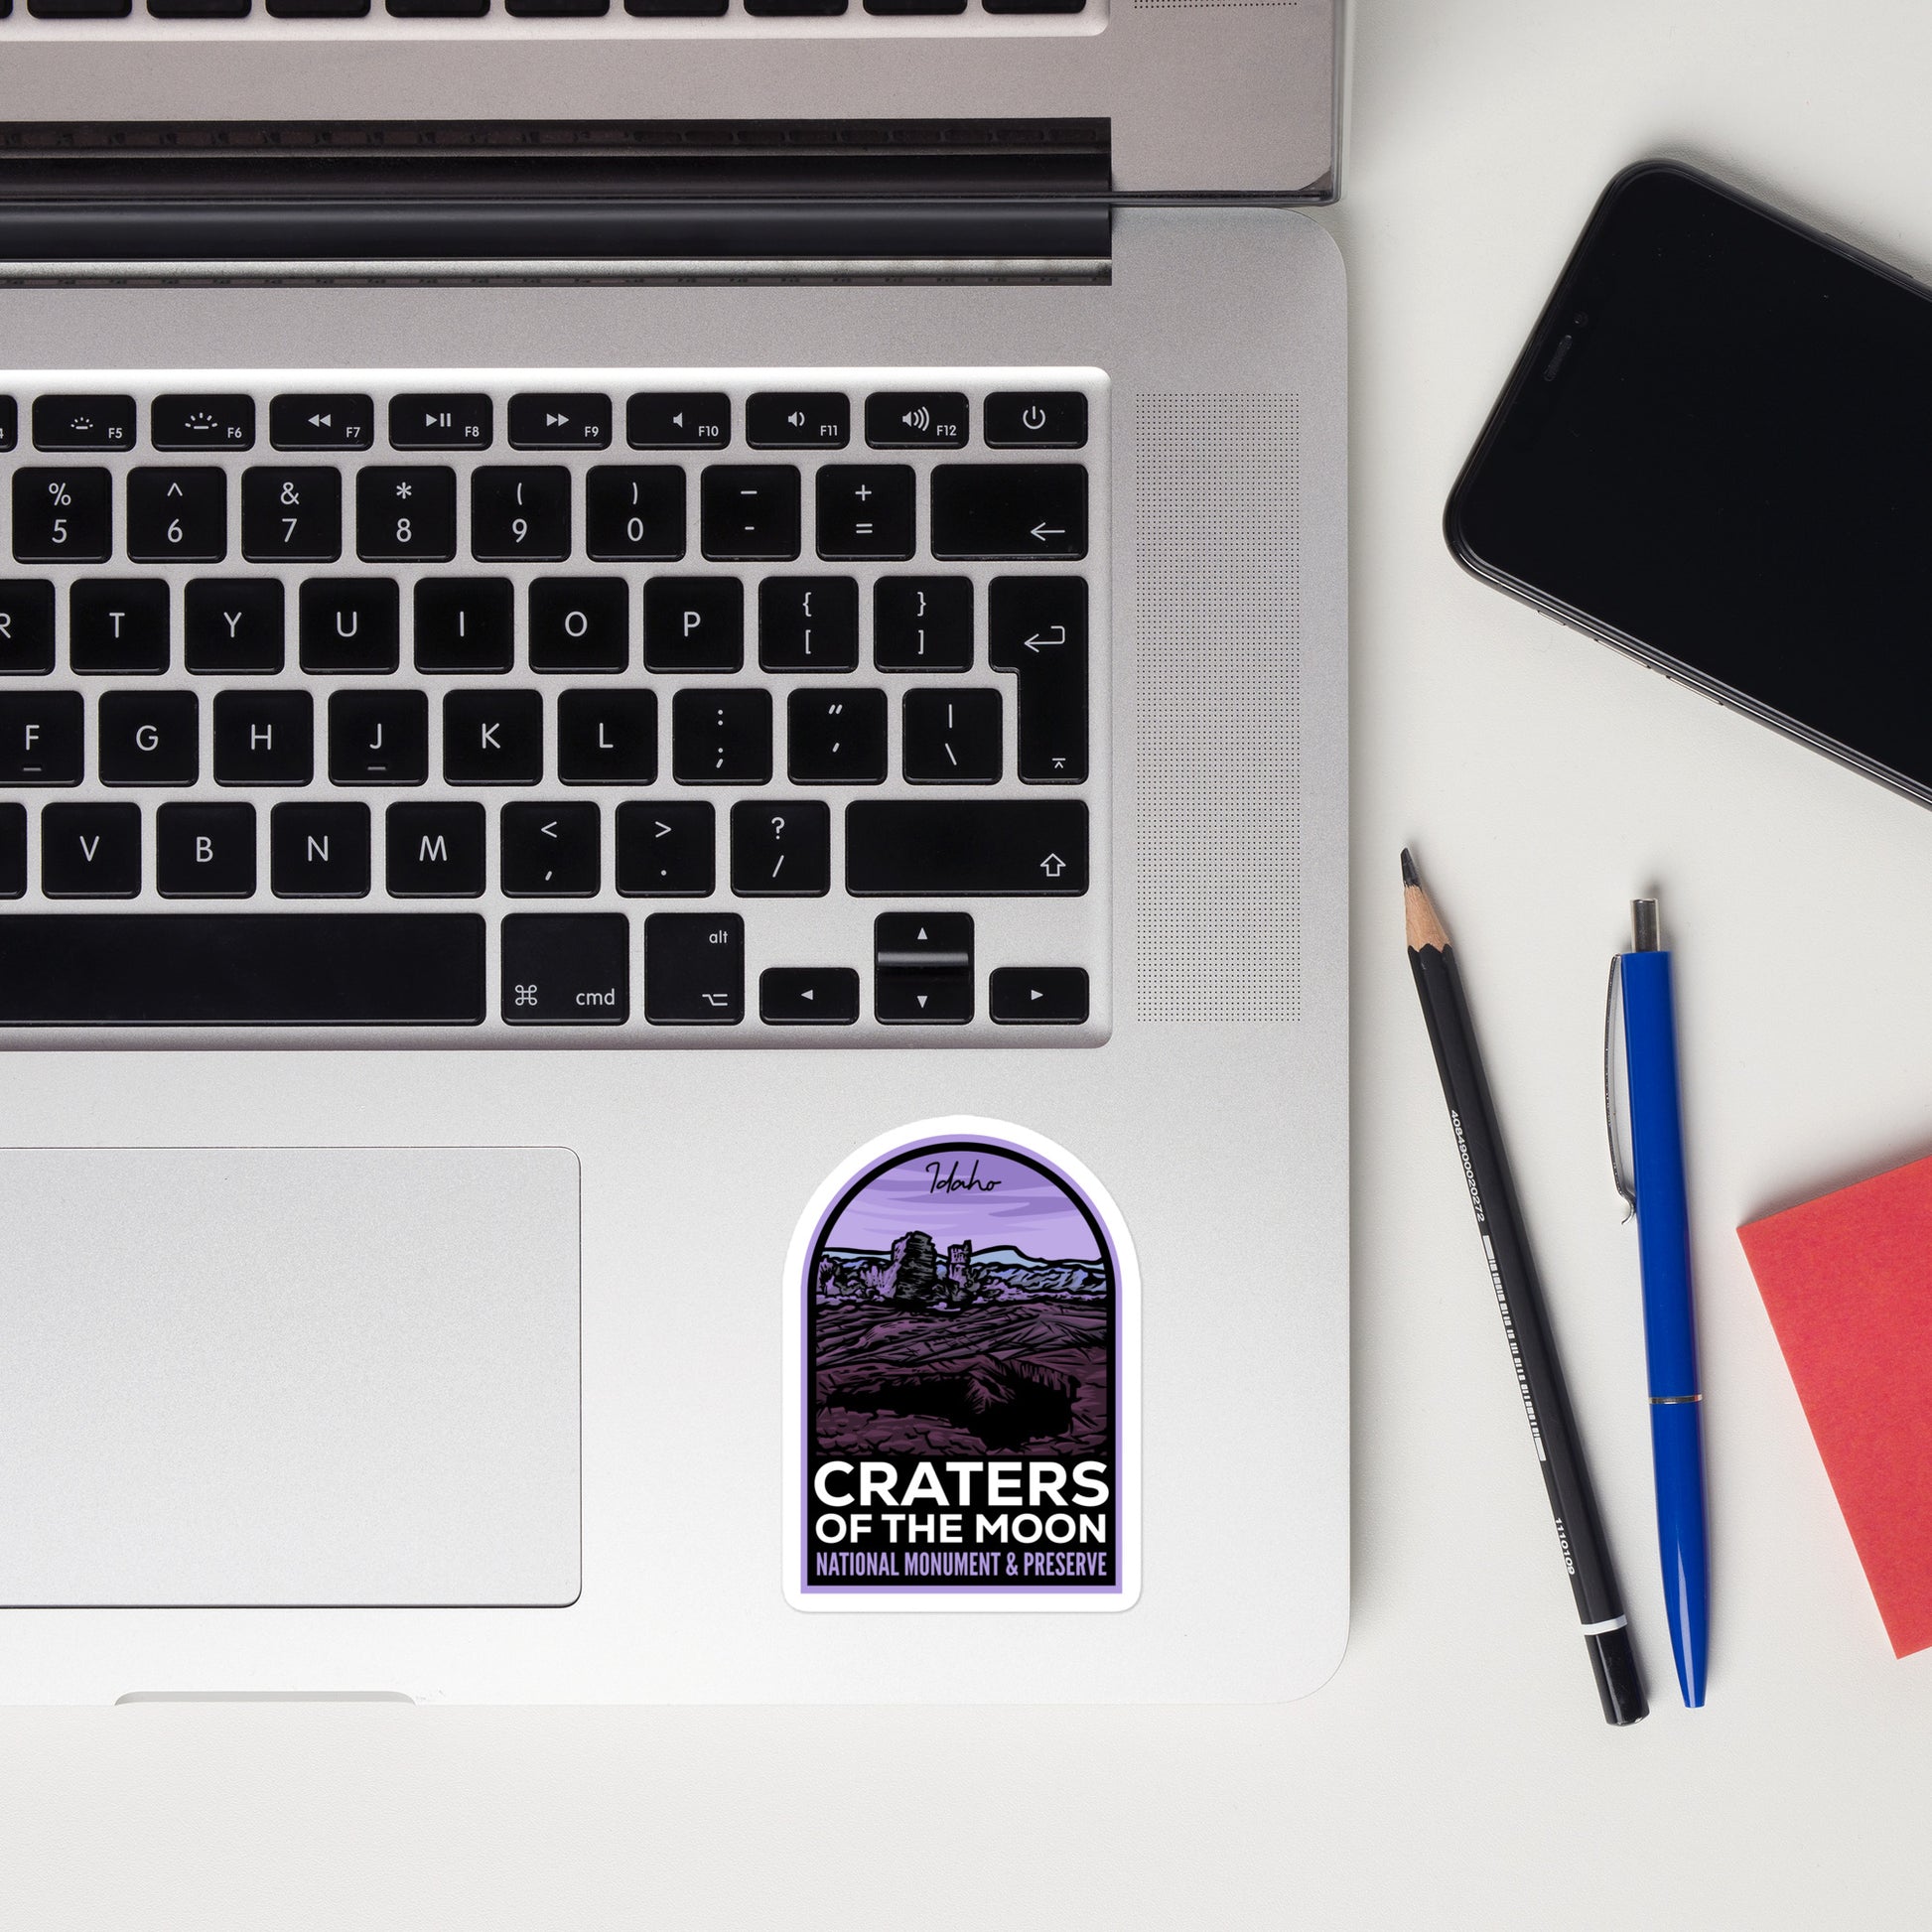 A sticker of Craters of the Moon National Monument on a laptop